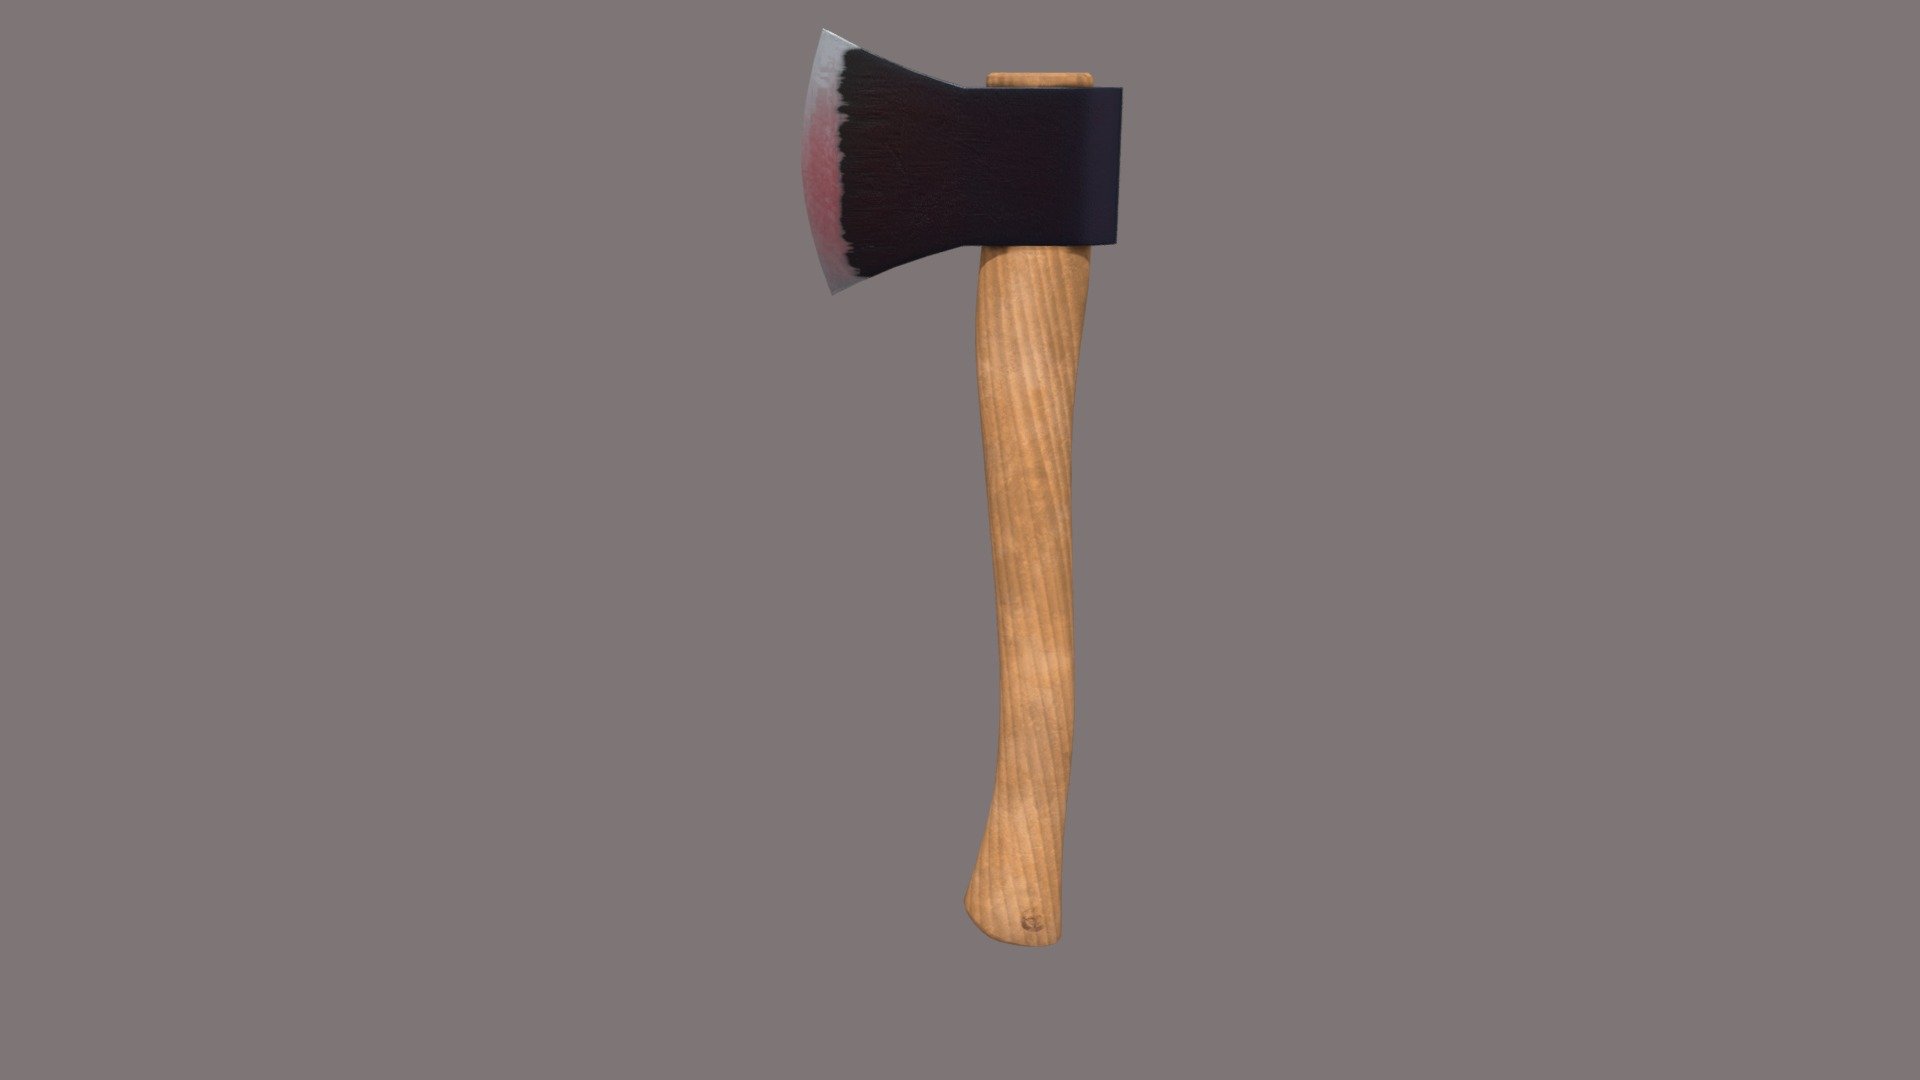 A (what I assume to be) medium sized hatchet, useful for cutting wood and surviving plane crashes in the woods.

Not really a weapon or military, but there is no &ldquo;tools